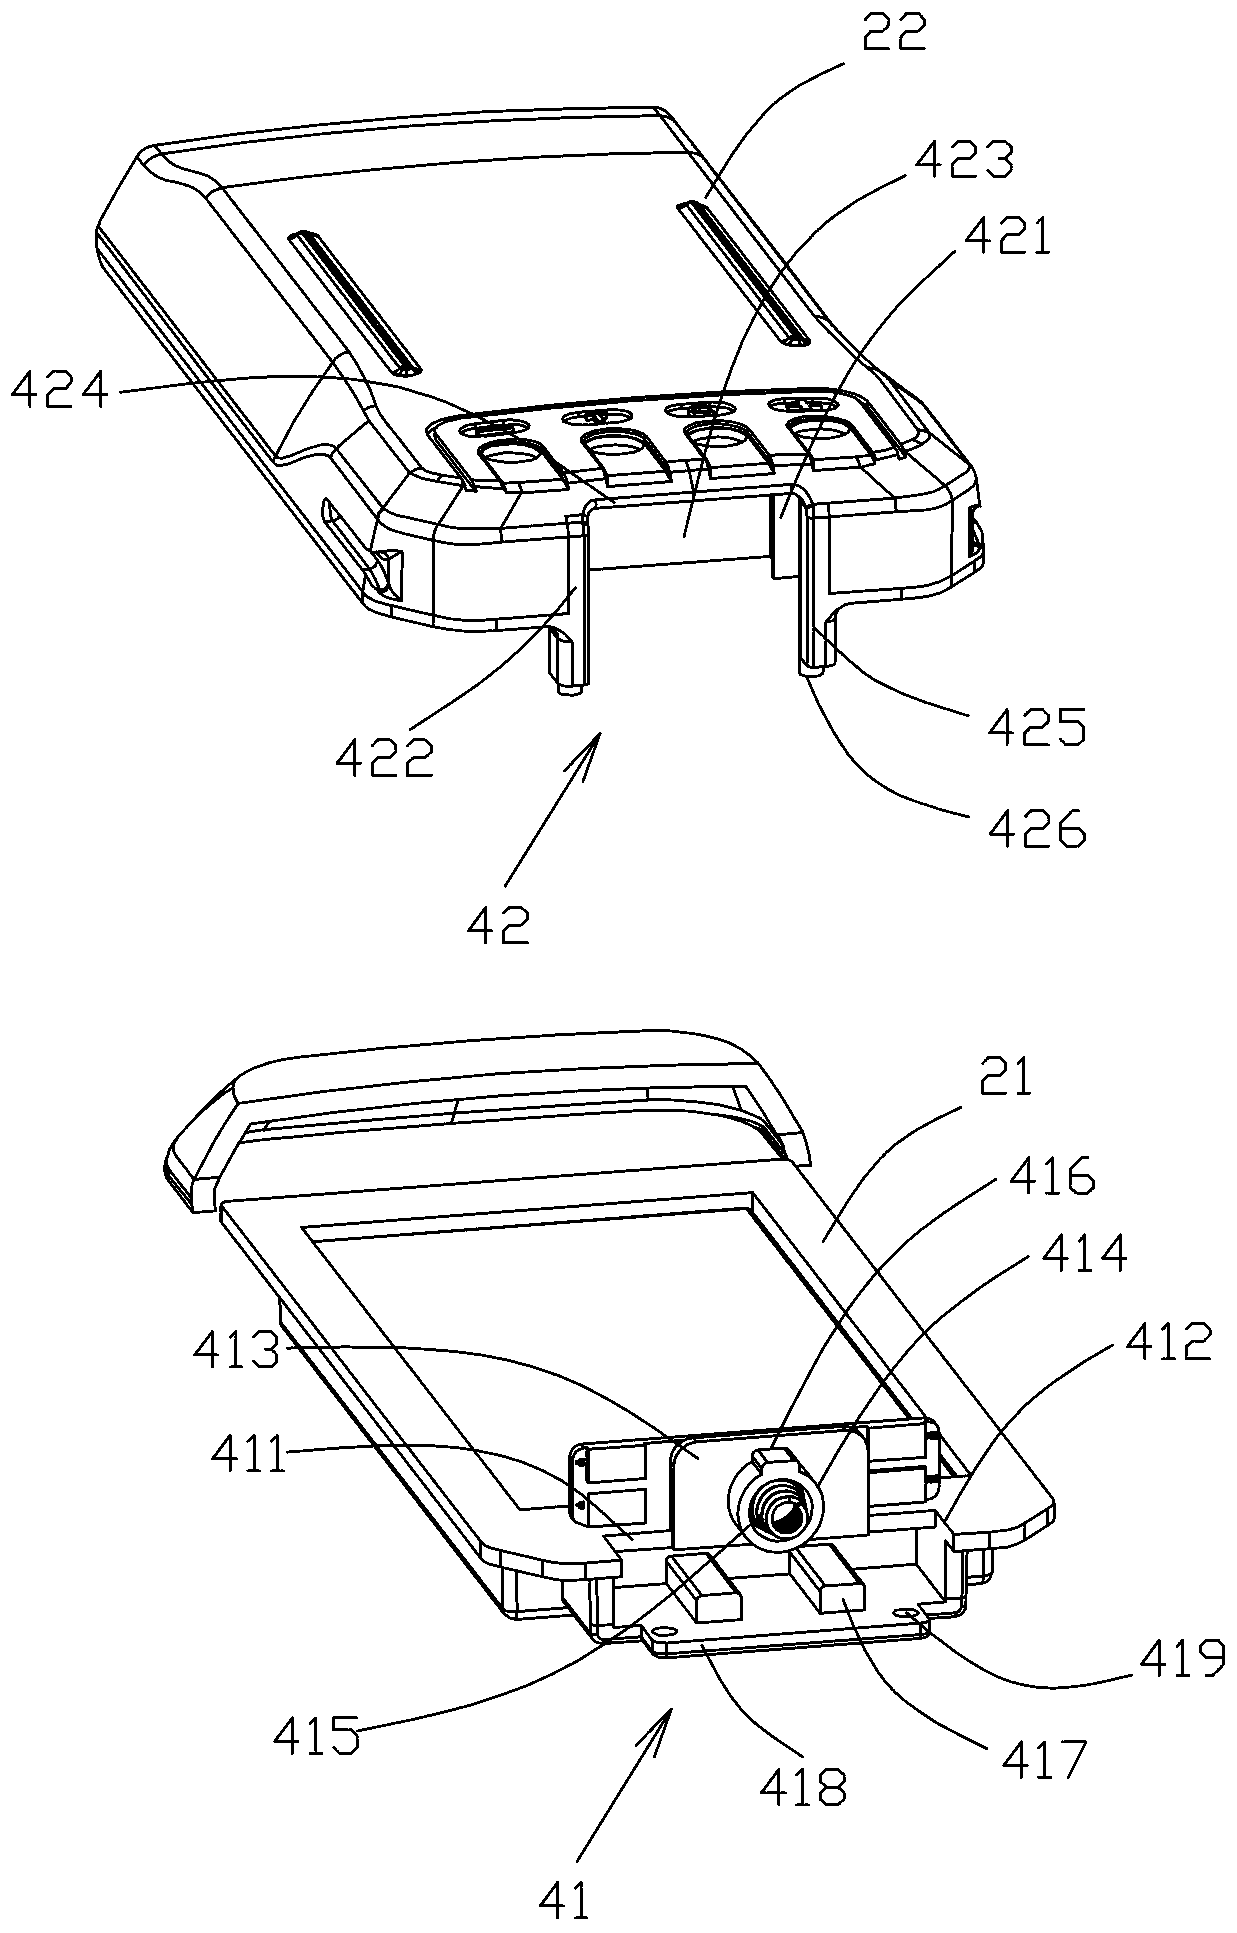 Battery assembly structure of interphone and assembly method thereof